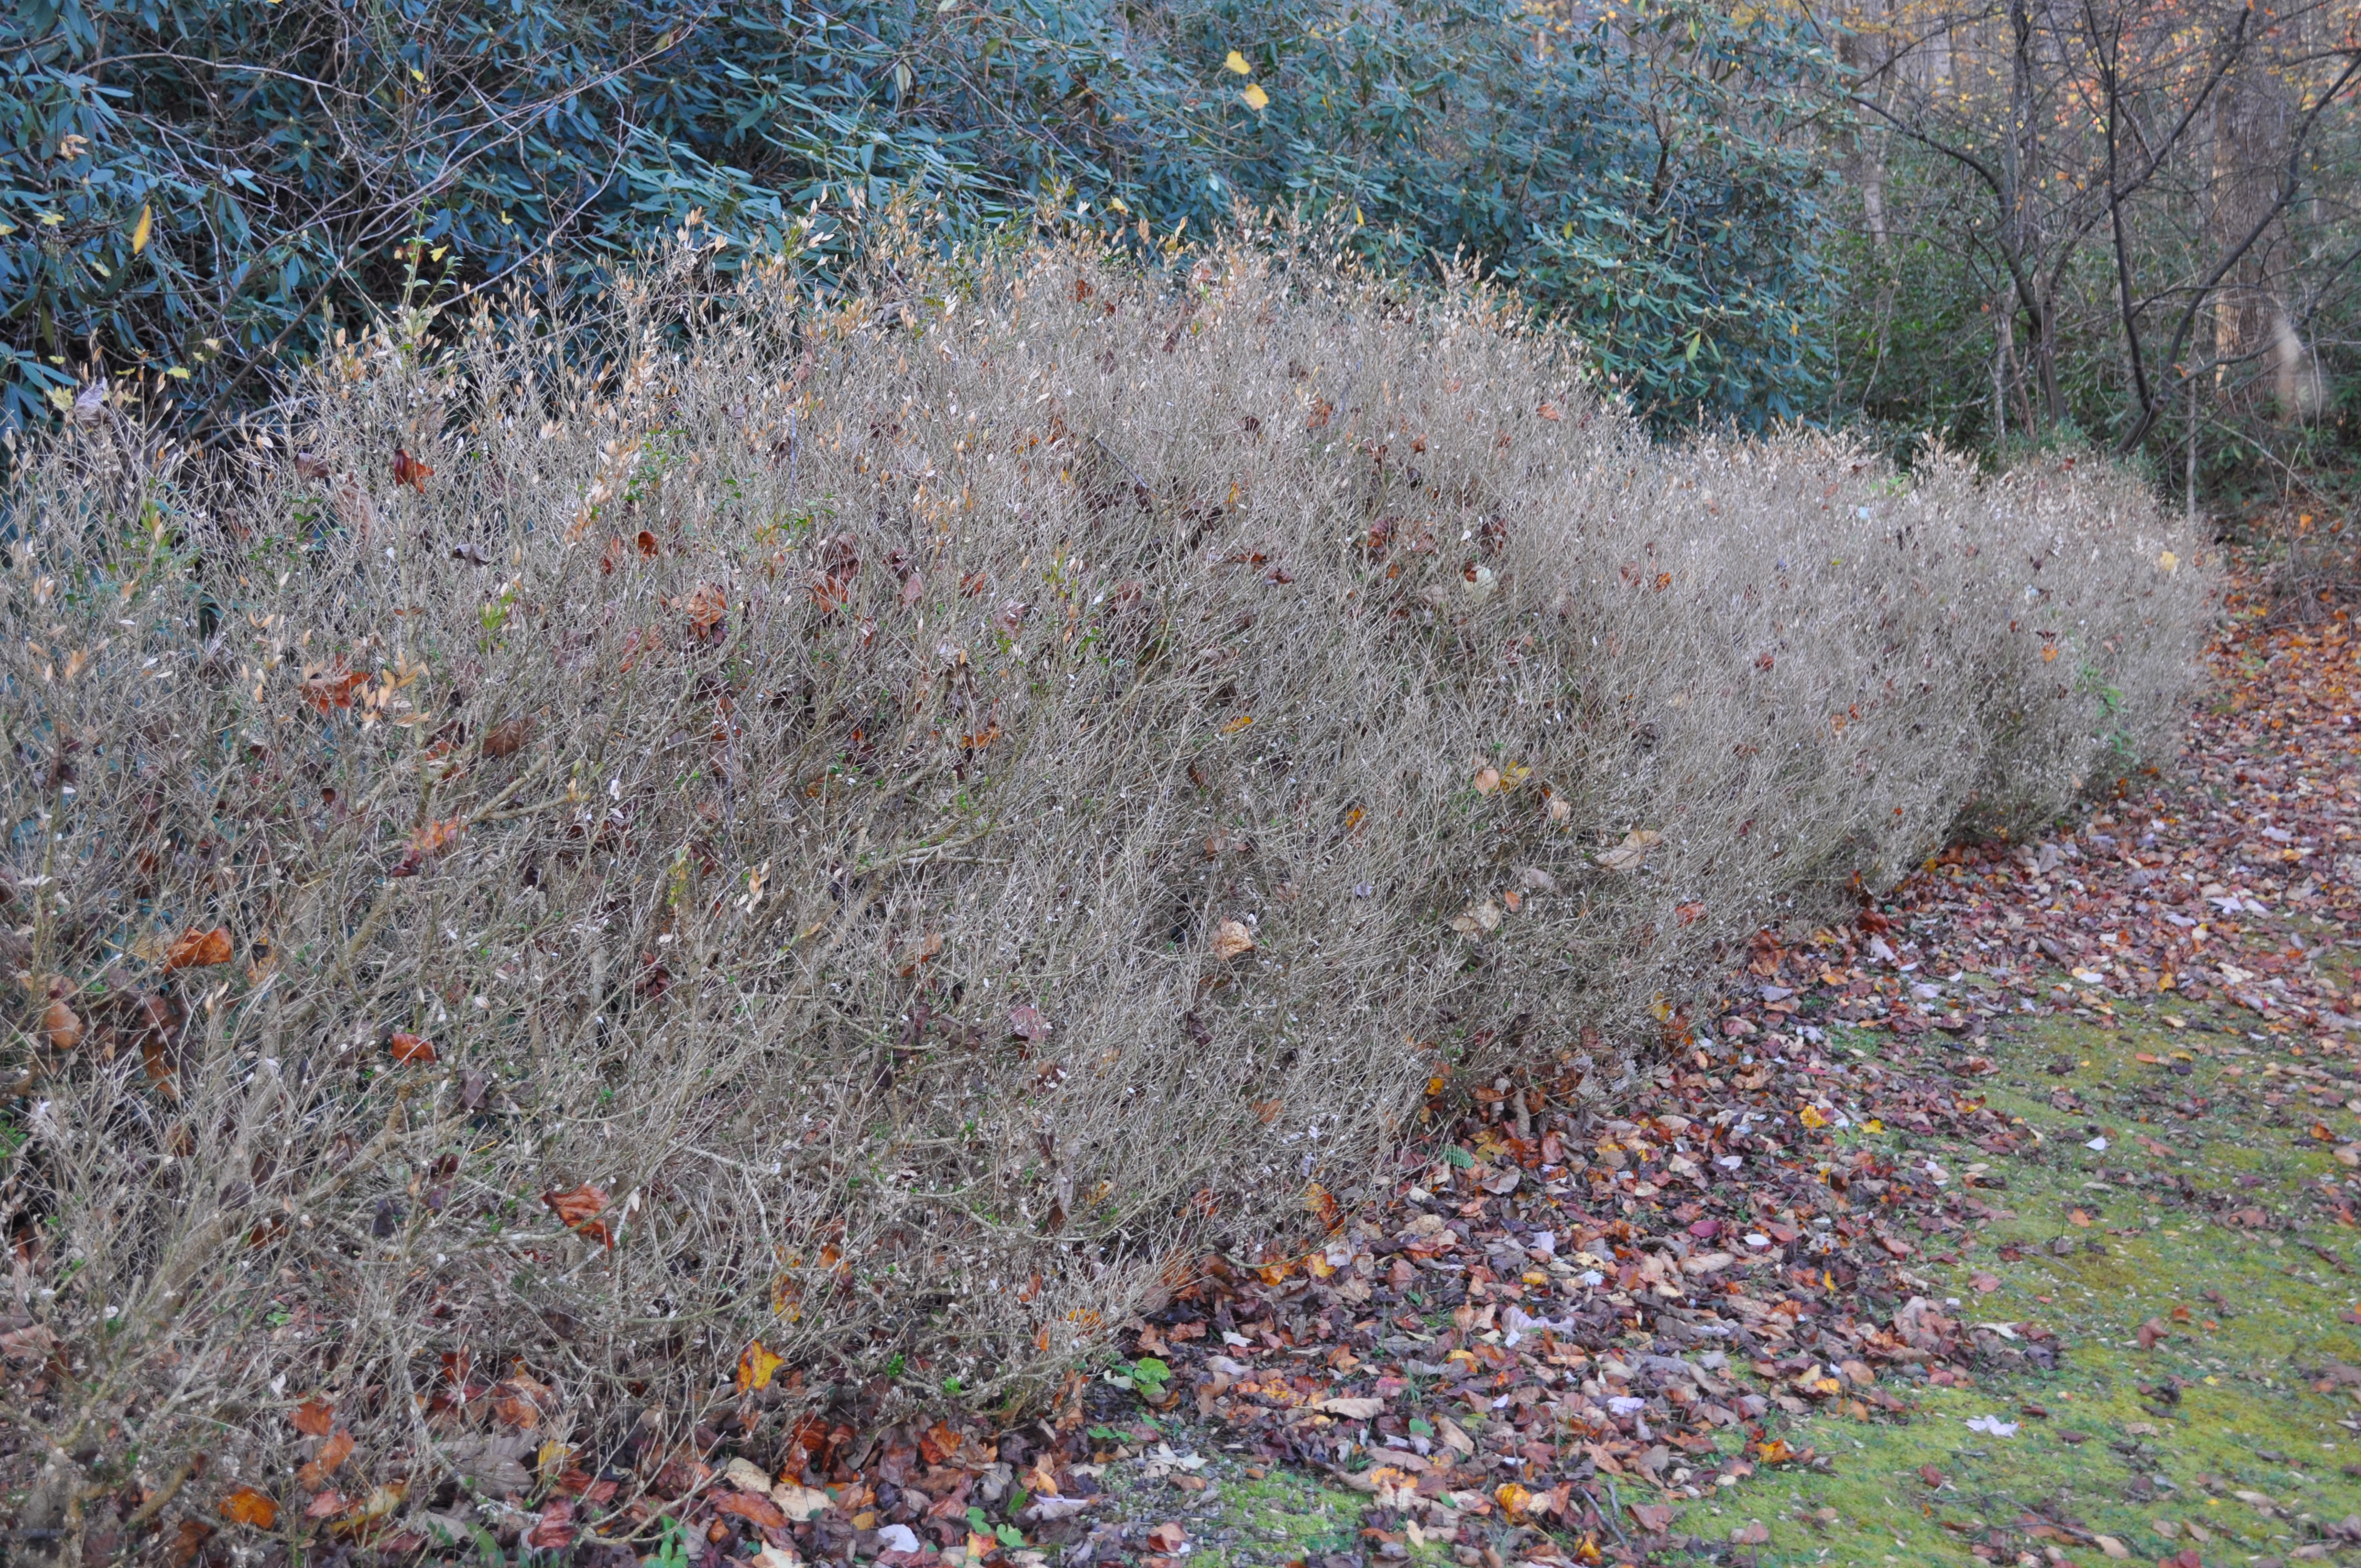 Plants affected by boxwood blight